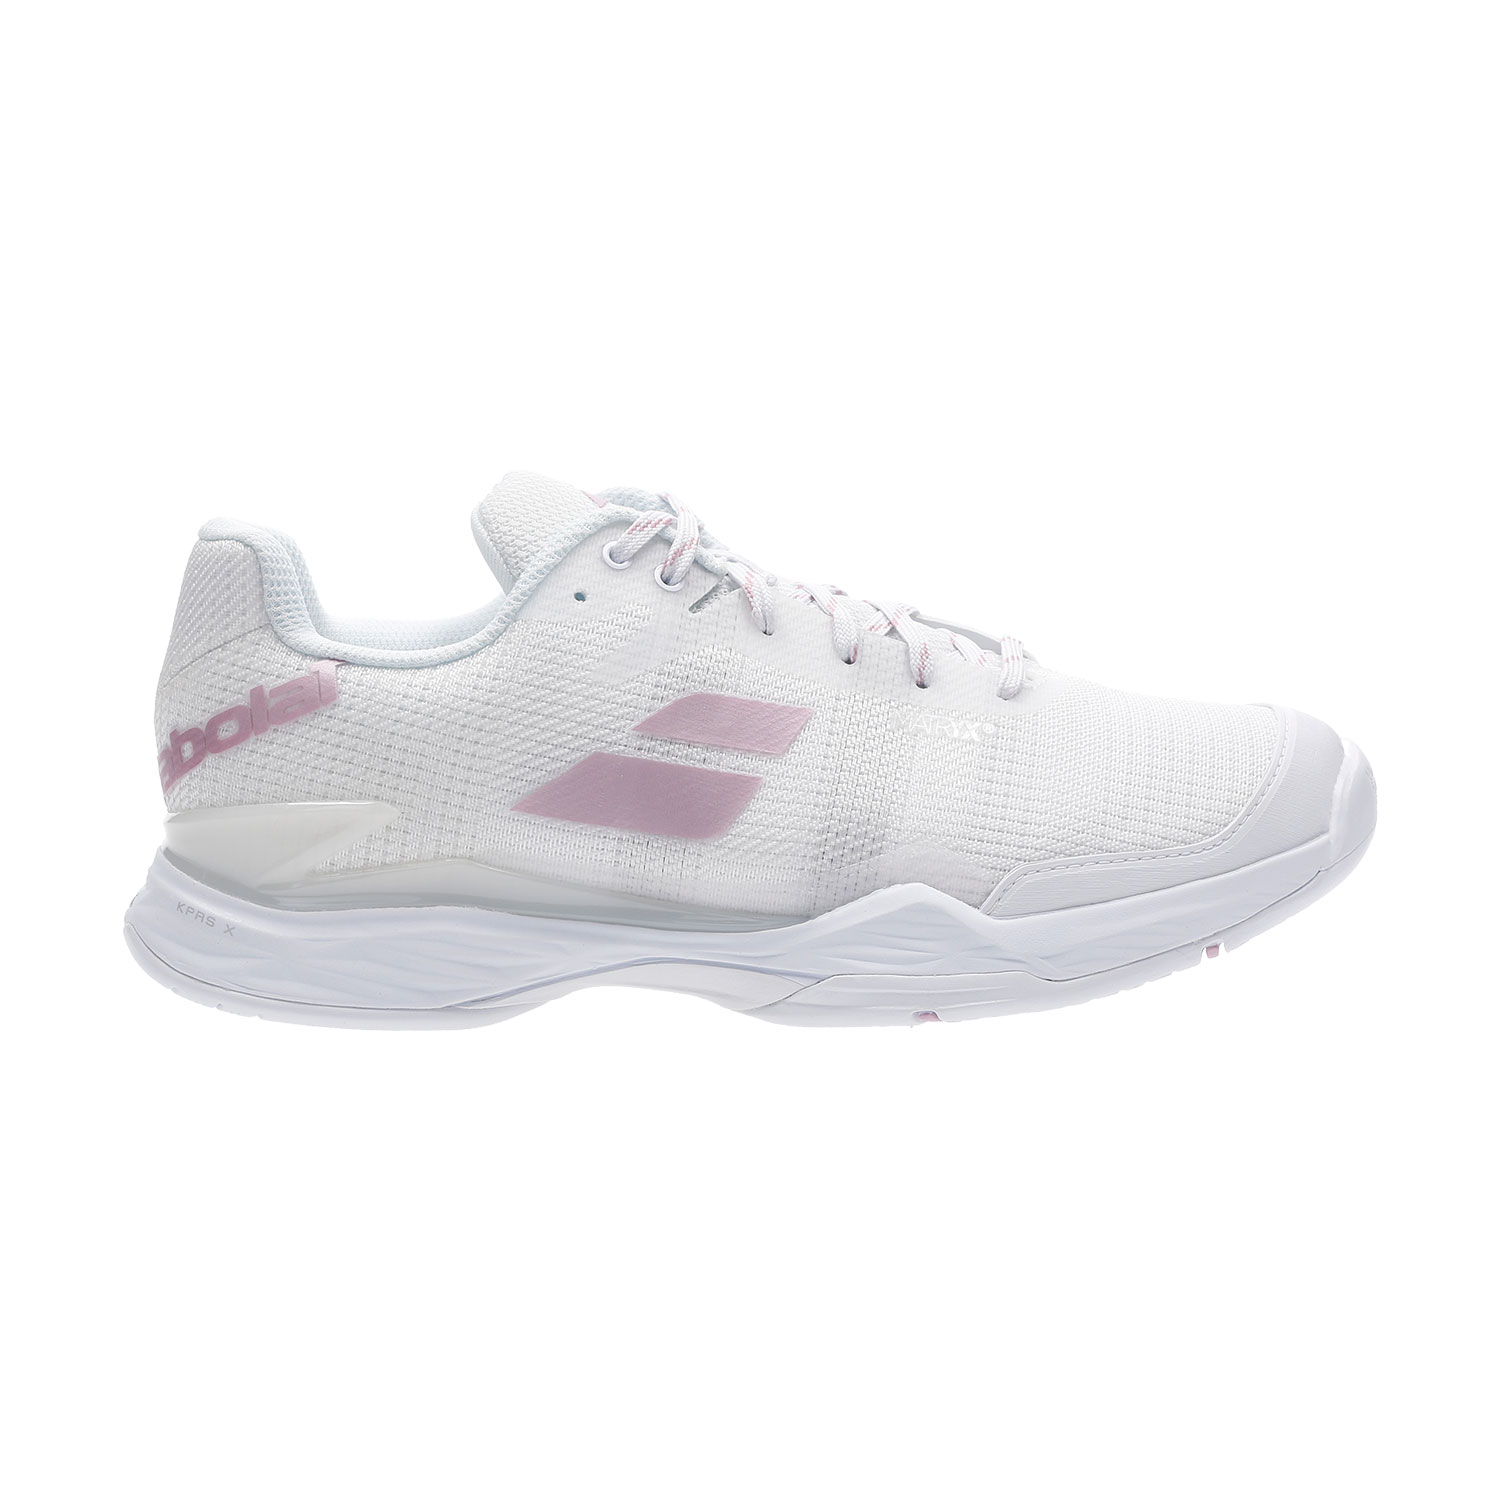 babolat jet all court tennis shoes